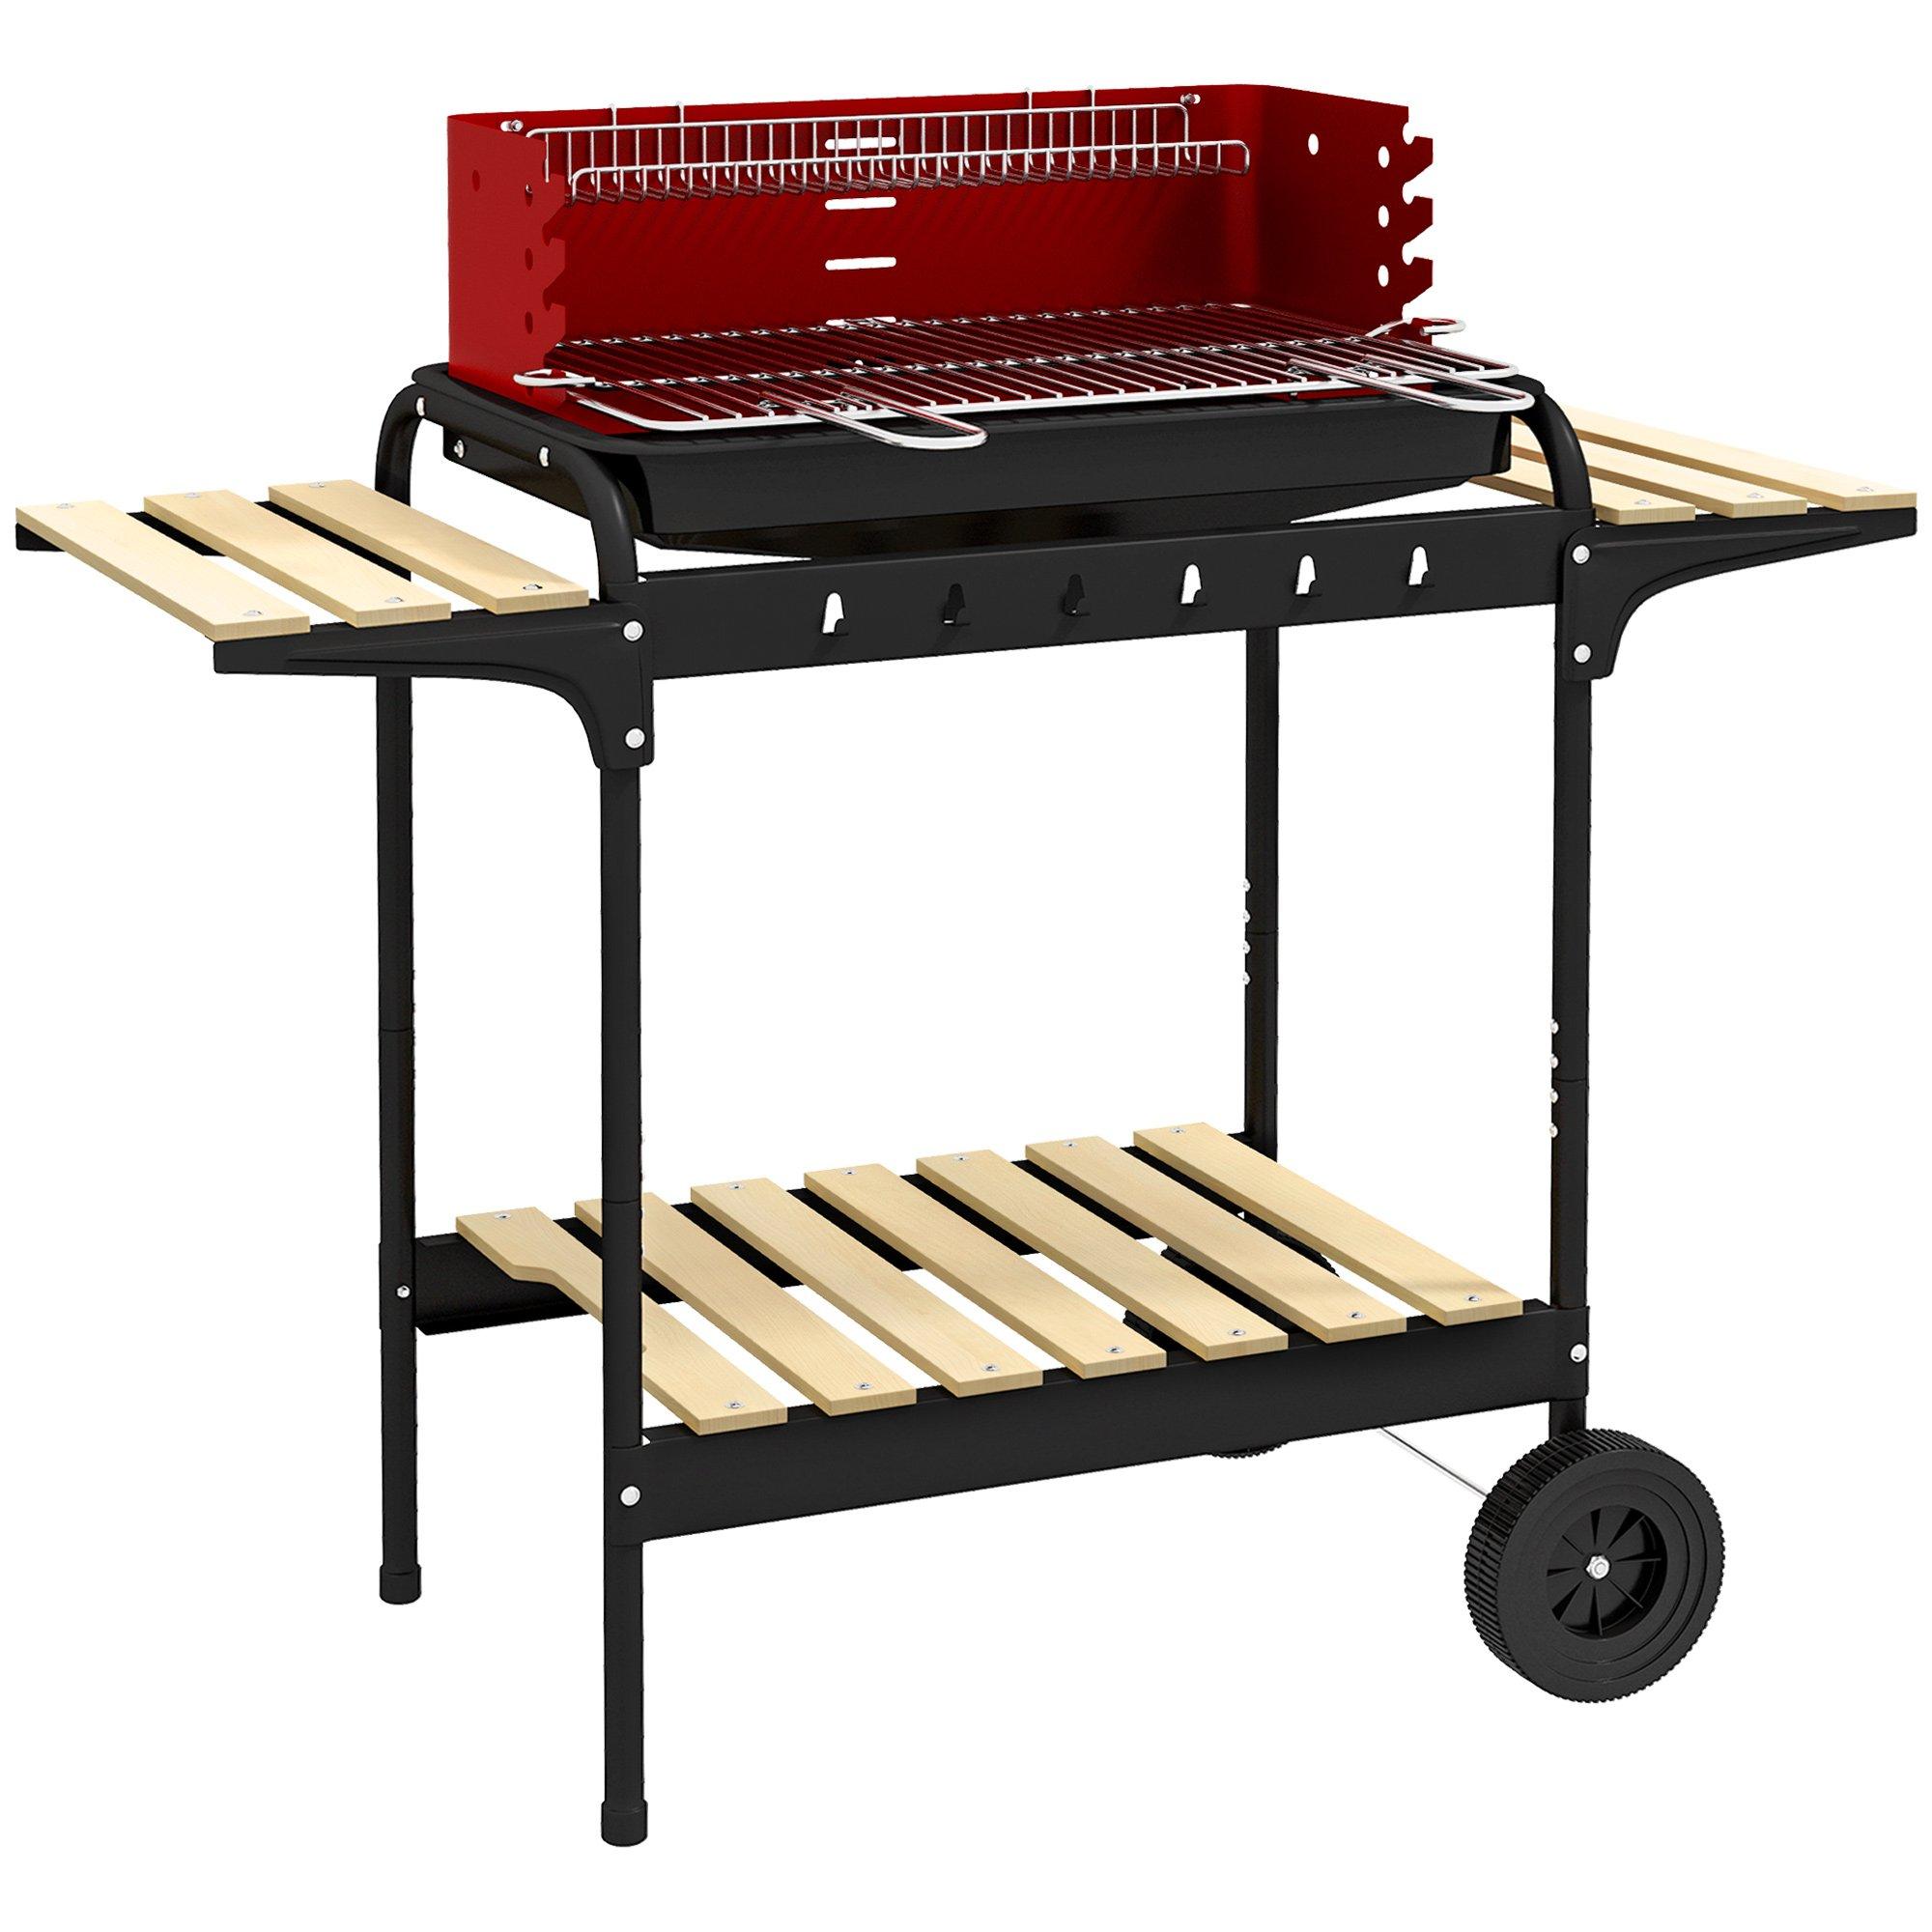 Charcoal Barbecue Grill with Adjustable Grill Height, Portable BBQ Trolley, Red